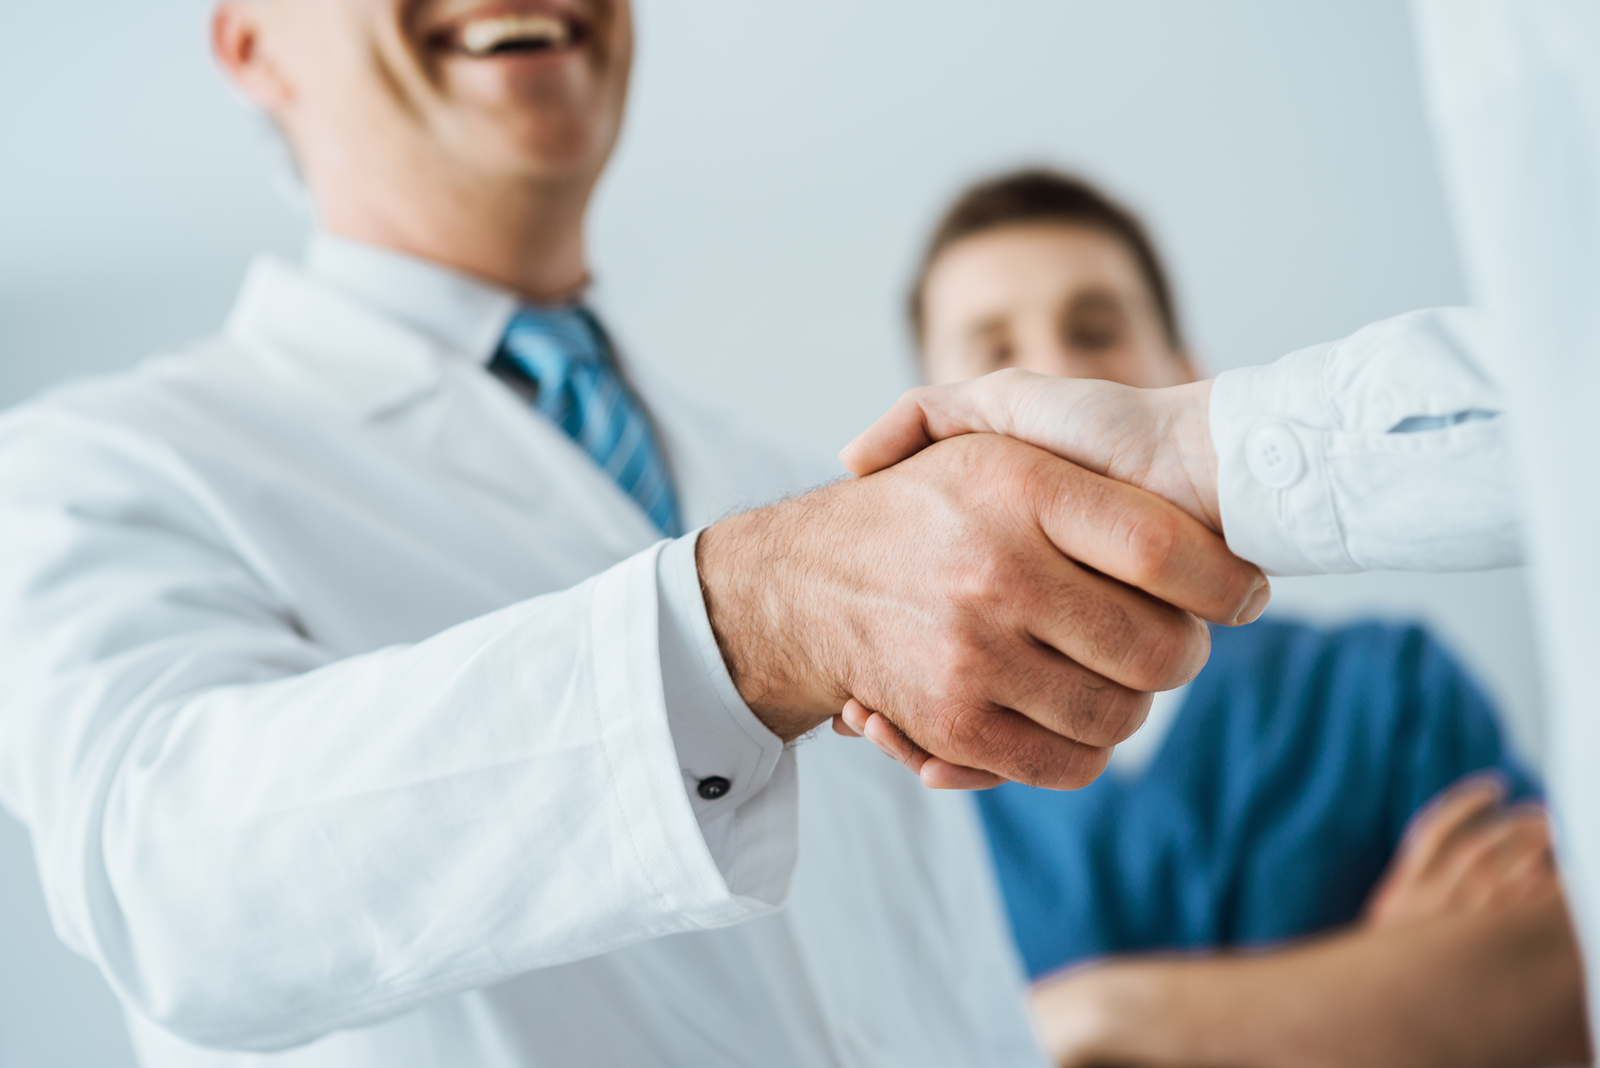 Patient with health plan under Special Enrollment shakes hands with doctor